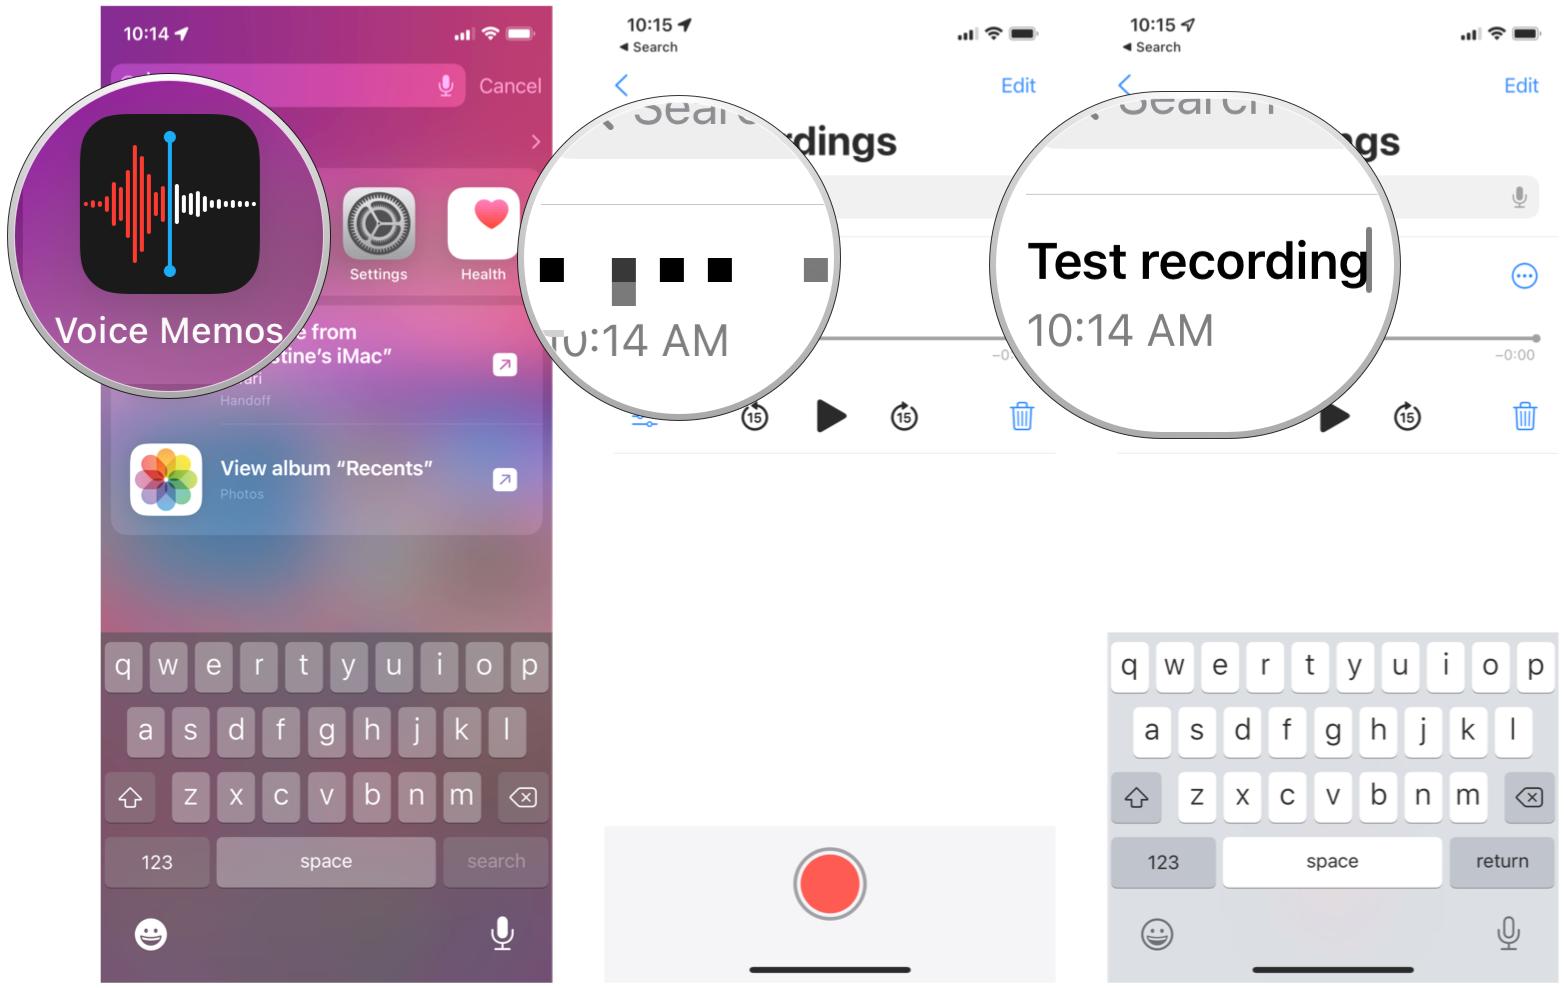 Rename a voice memo on iPhone by showing: Open Voice Memos, tap recording name, input new name